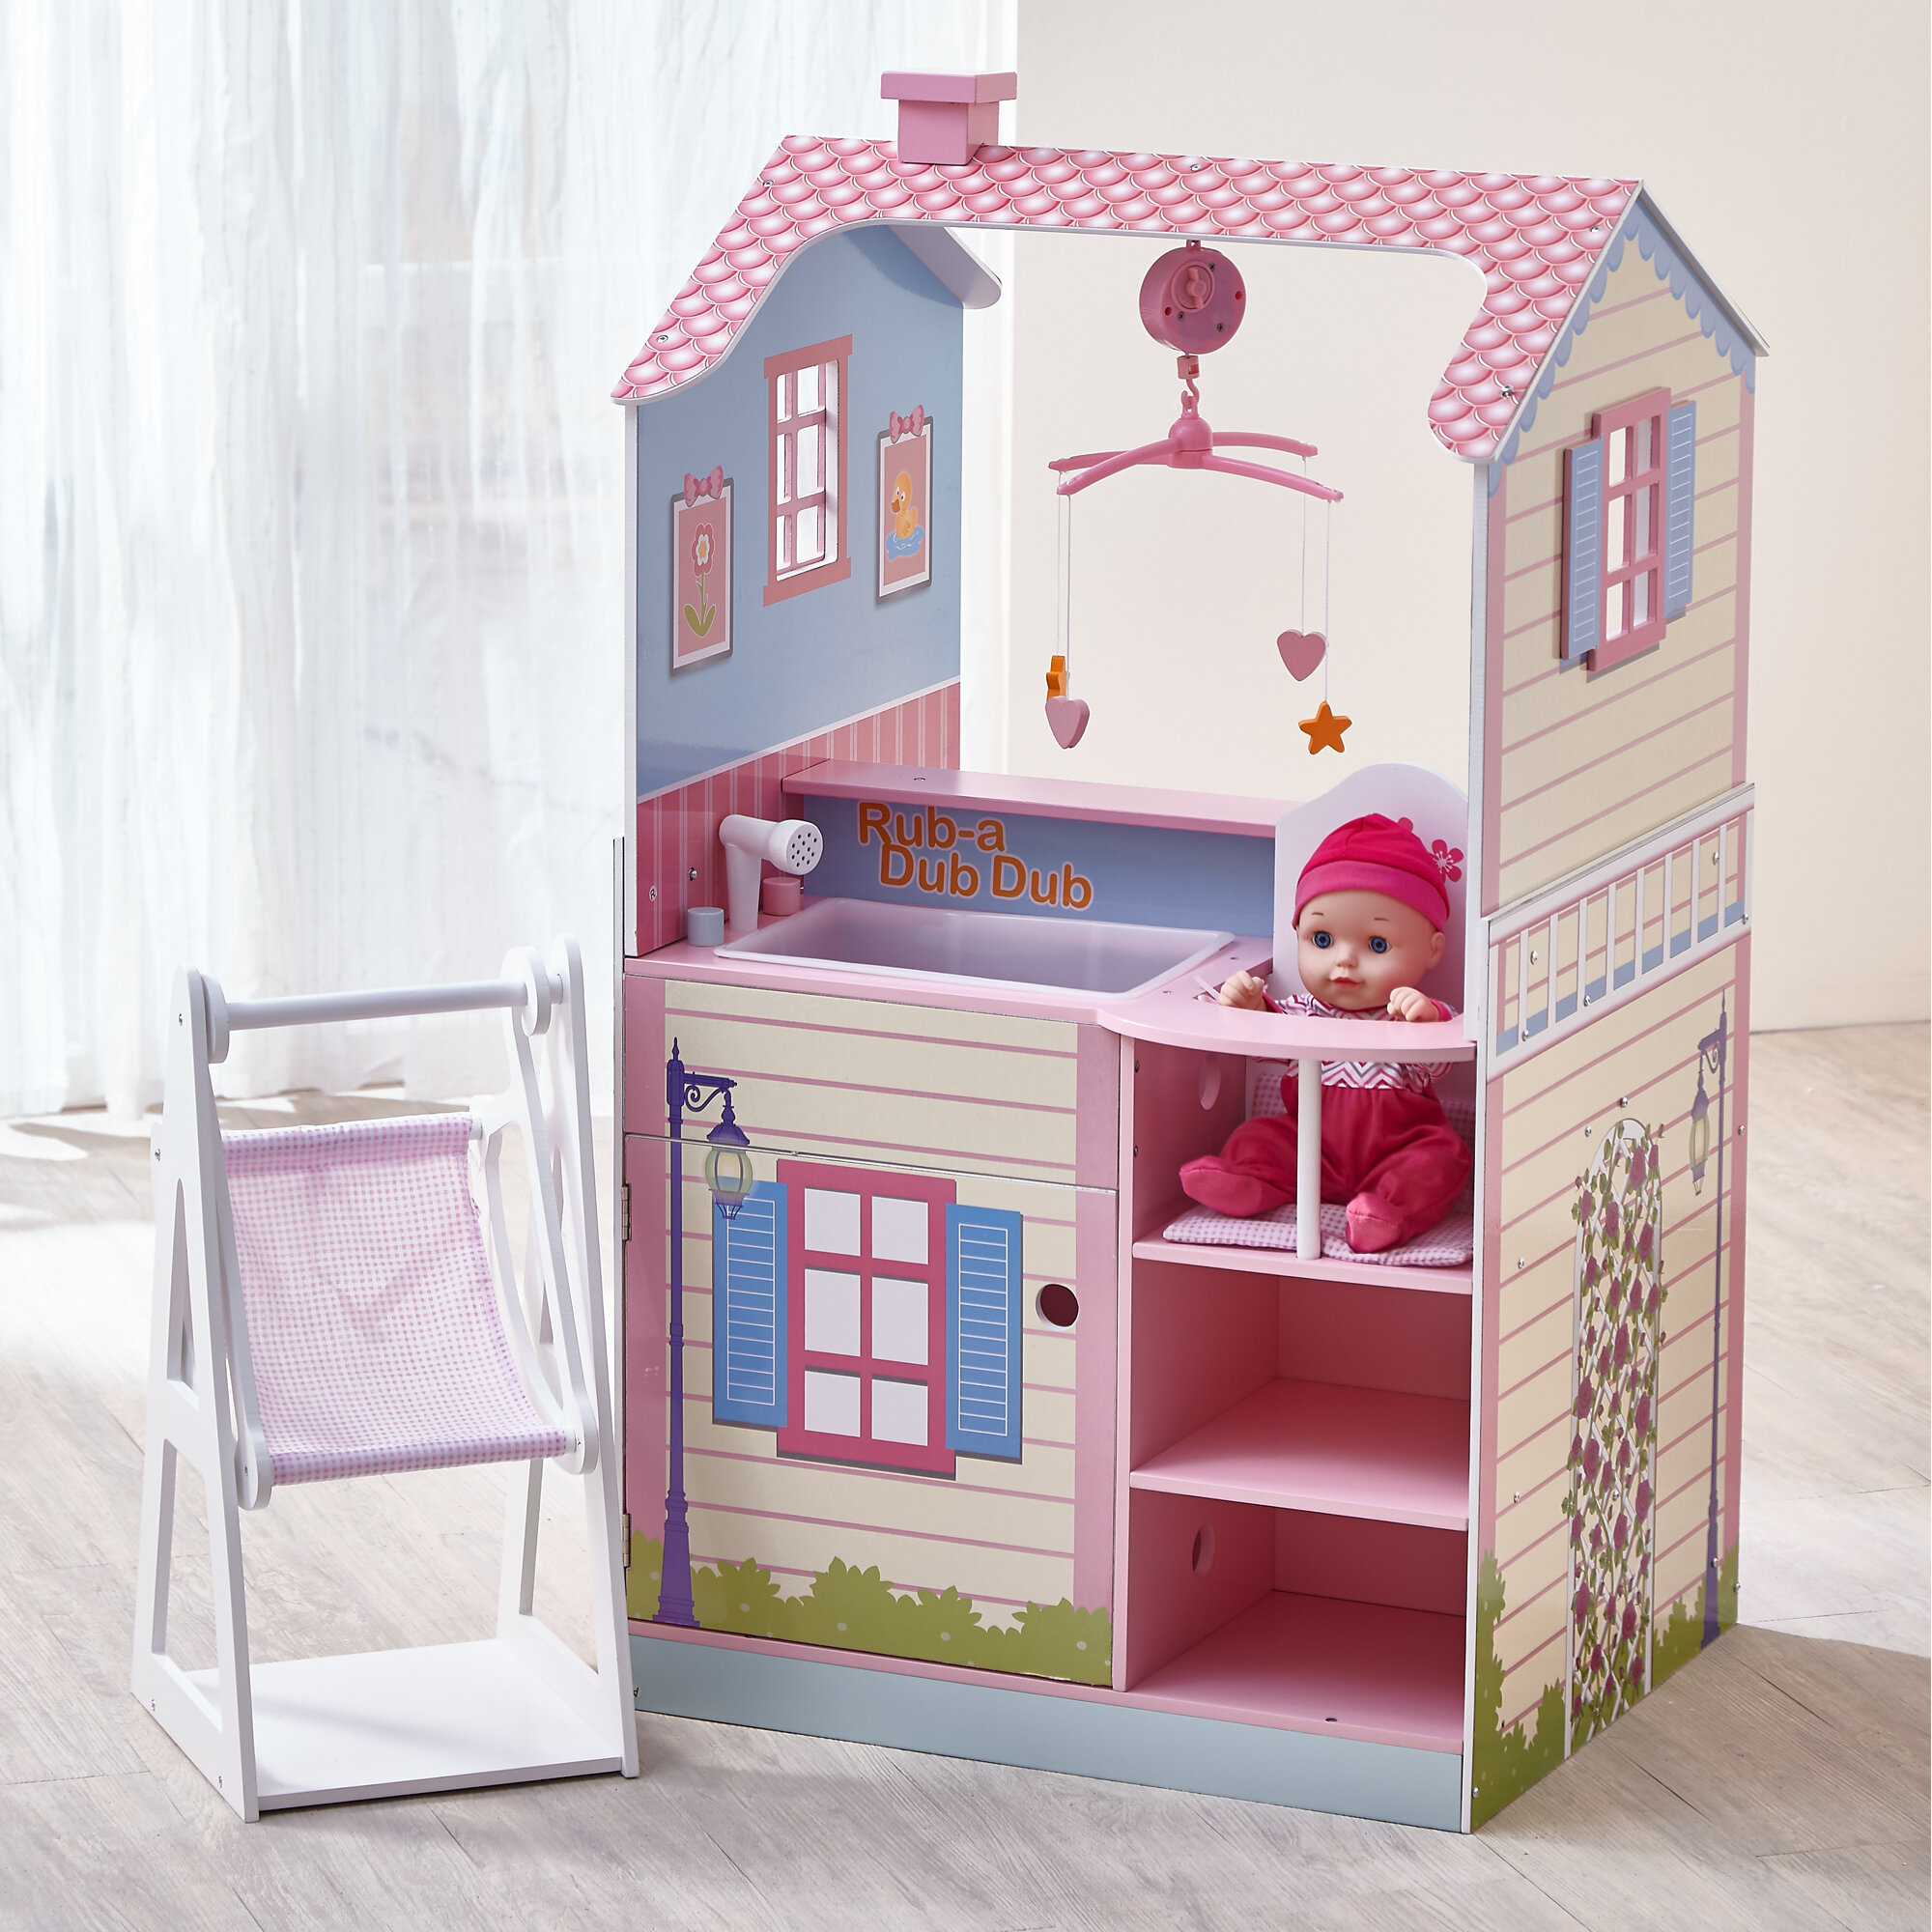 the baby doll house